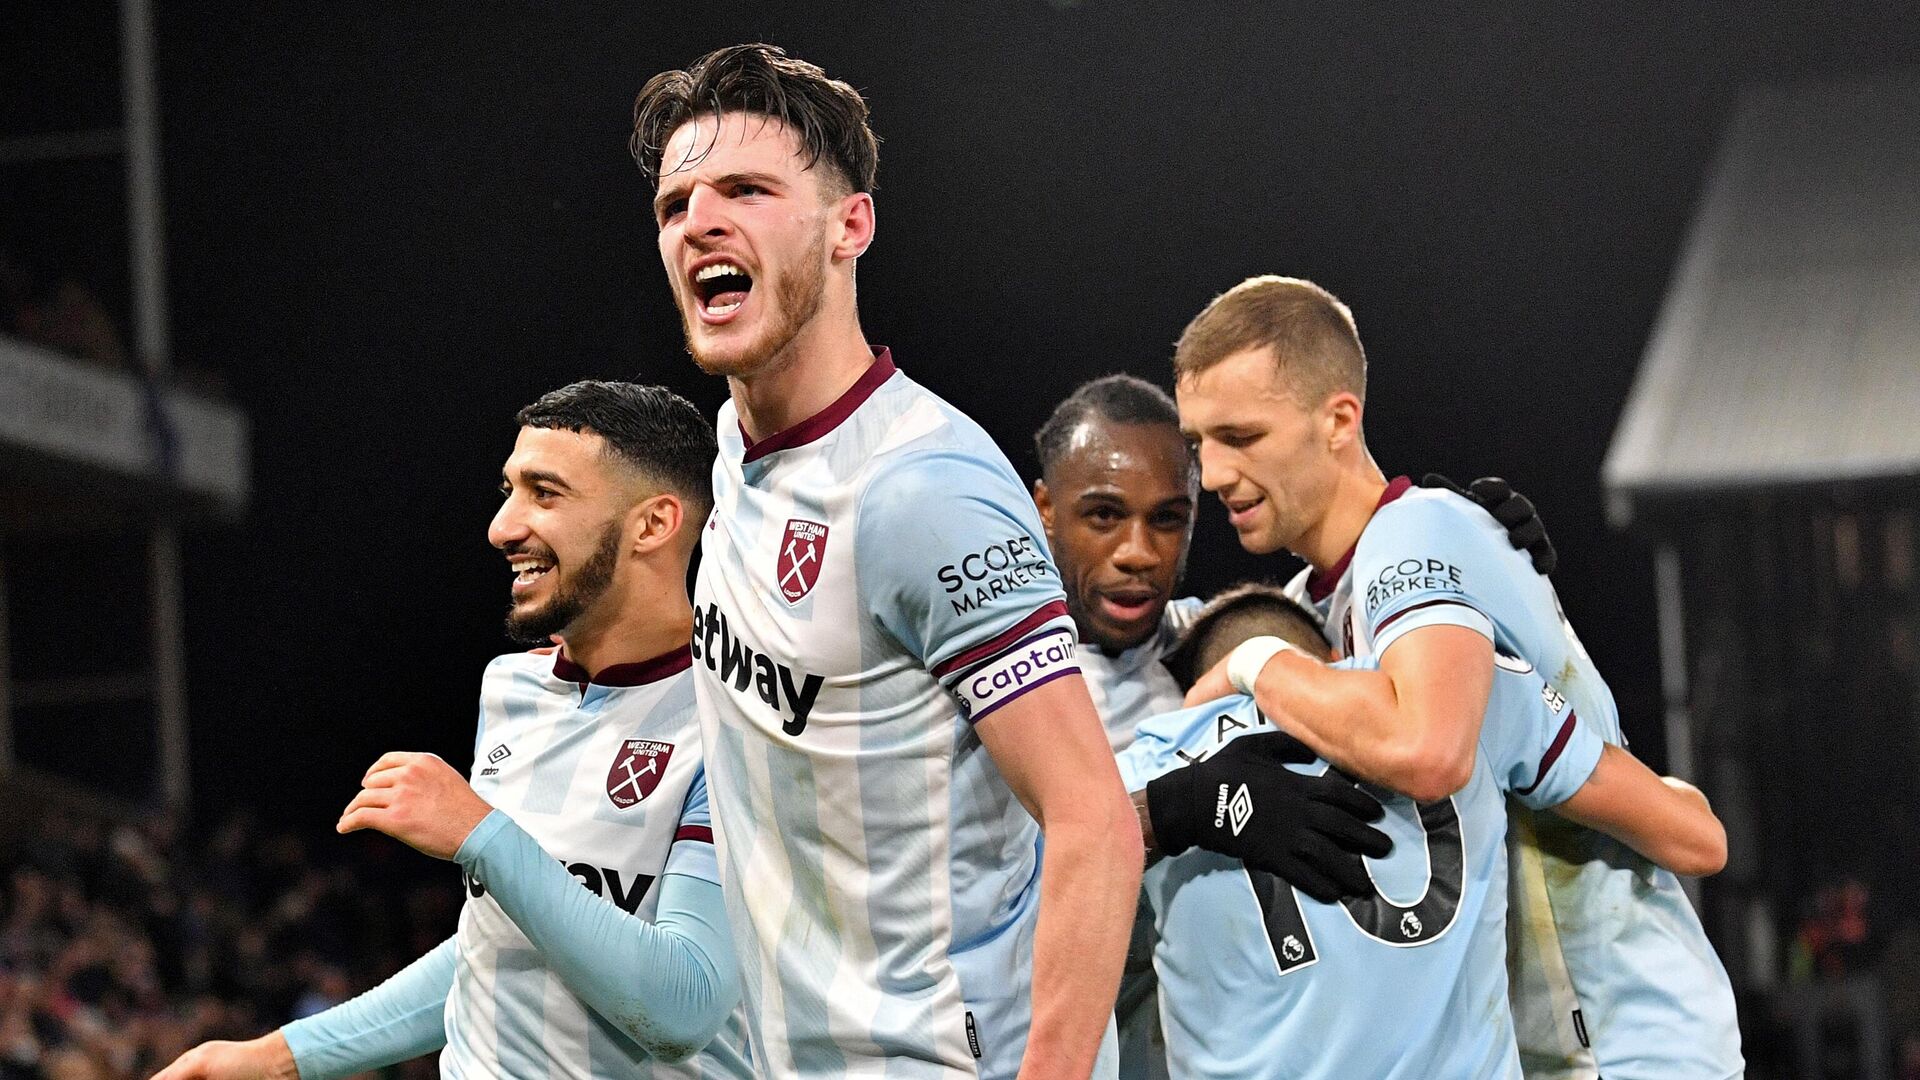 West Ham United's Argentinian midfielder Manuel Lanzini (2R) celebrates scoring his team's third goal with West Ham United's Algerian midfielder Said Benrahma (L) West Ham United's English midfielder Declan Rice (2L) and West Ham United's English midfielder Michail Antonio (C) during the English Premier League football match between Crystal Palace and West Ham United at Selhurst Park in south London on January 1, 2022. (Photo by JUSTIN TALLIS / AFP) / RESTRICTED TO EDITORIAL USE. No use with unauthorized audio, video, data, fixture lists, club/league logos or 'live' services. Online in-match use limited to 120 images. An additional 40 images may be used in extra time. No video emulation. Social media in-match use limited to 120 images. An additional 40 images may be used in extra time. No use in betting publications, games or single club/league/player publications. /  - РИА Новости, 1920, 01.01.2022